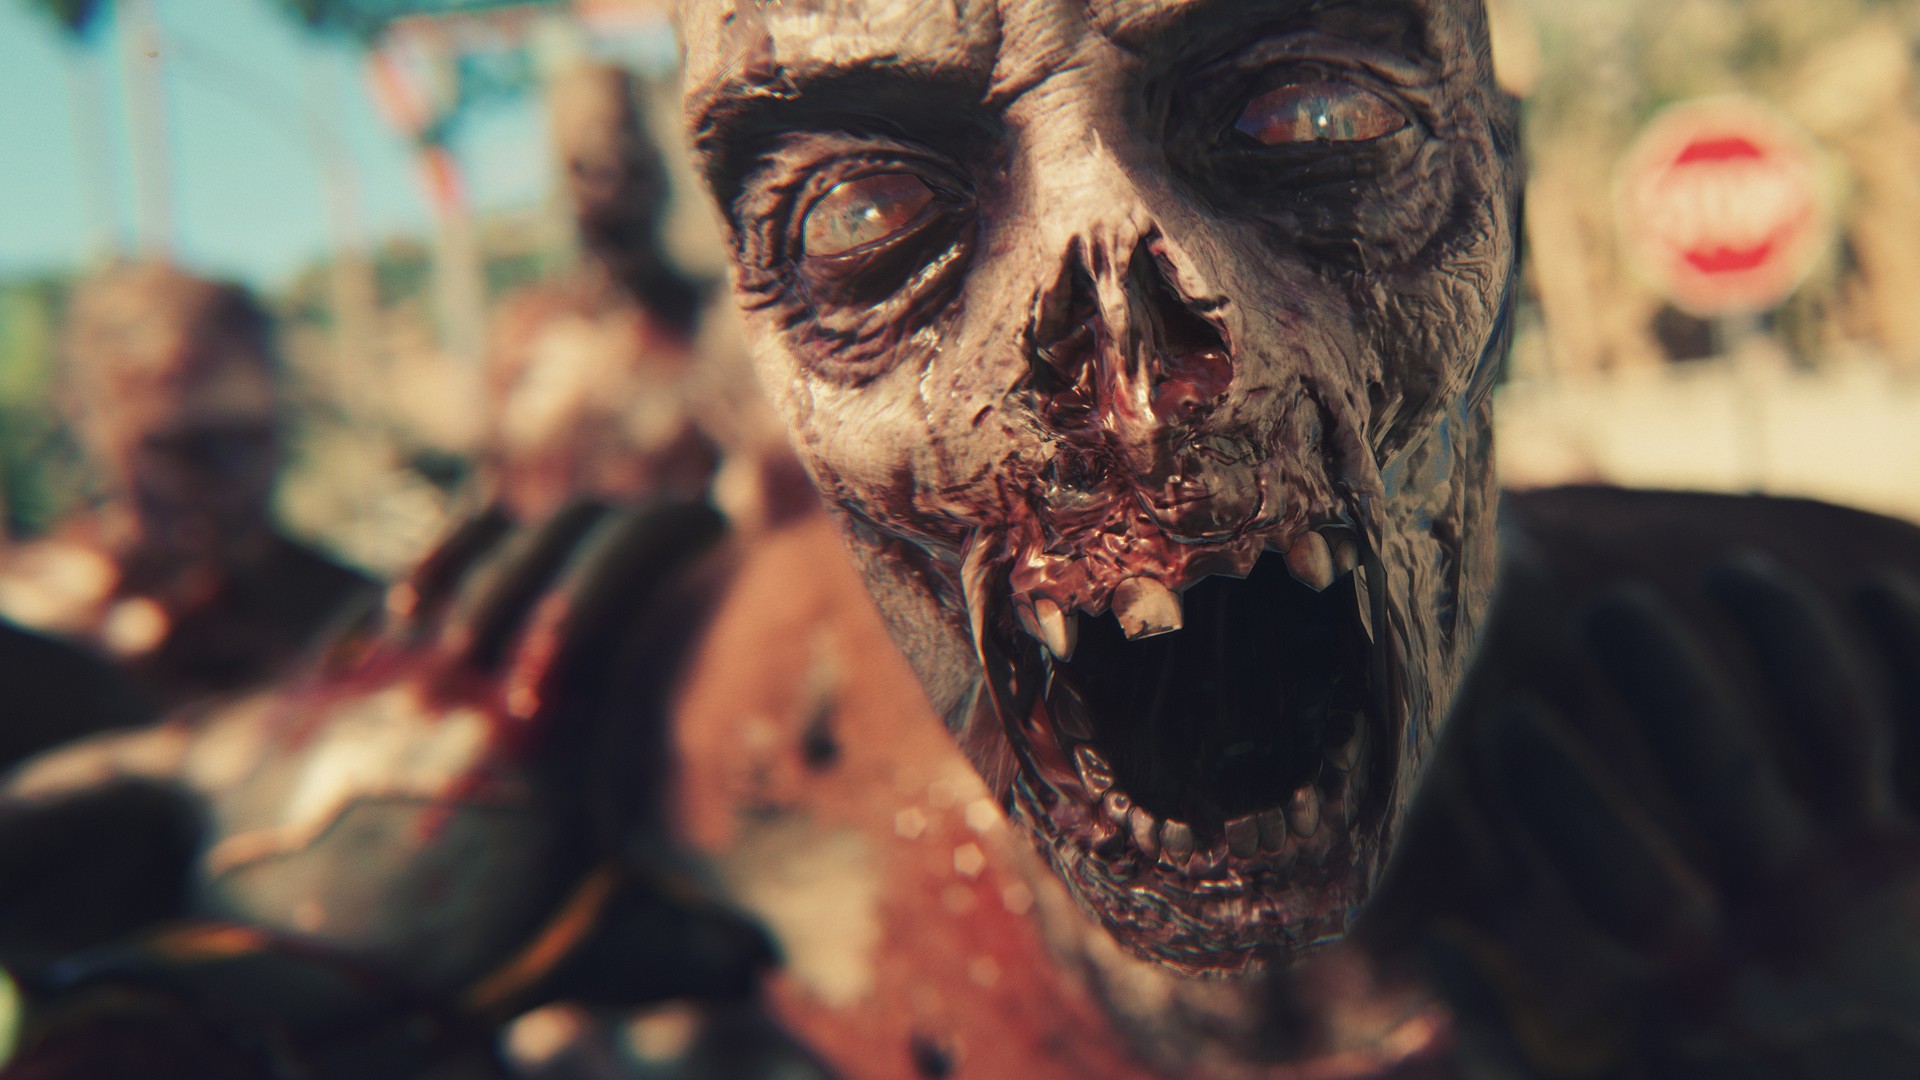 dead island 2 ps4 game